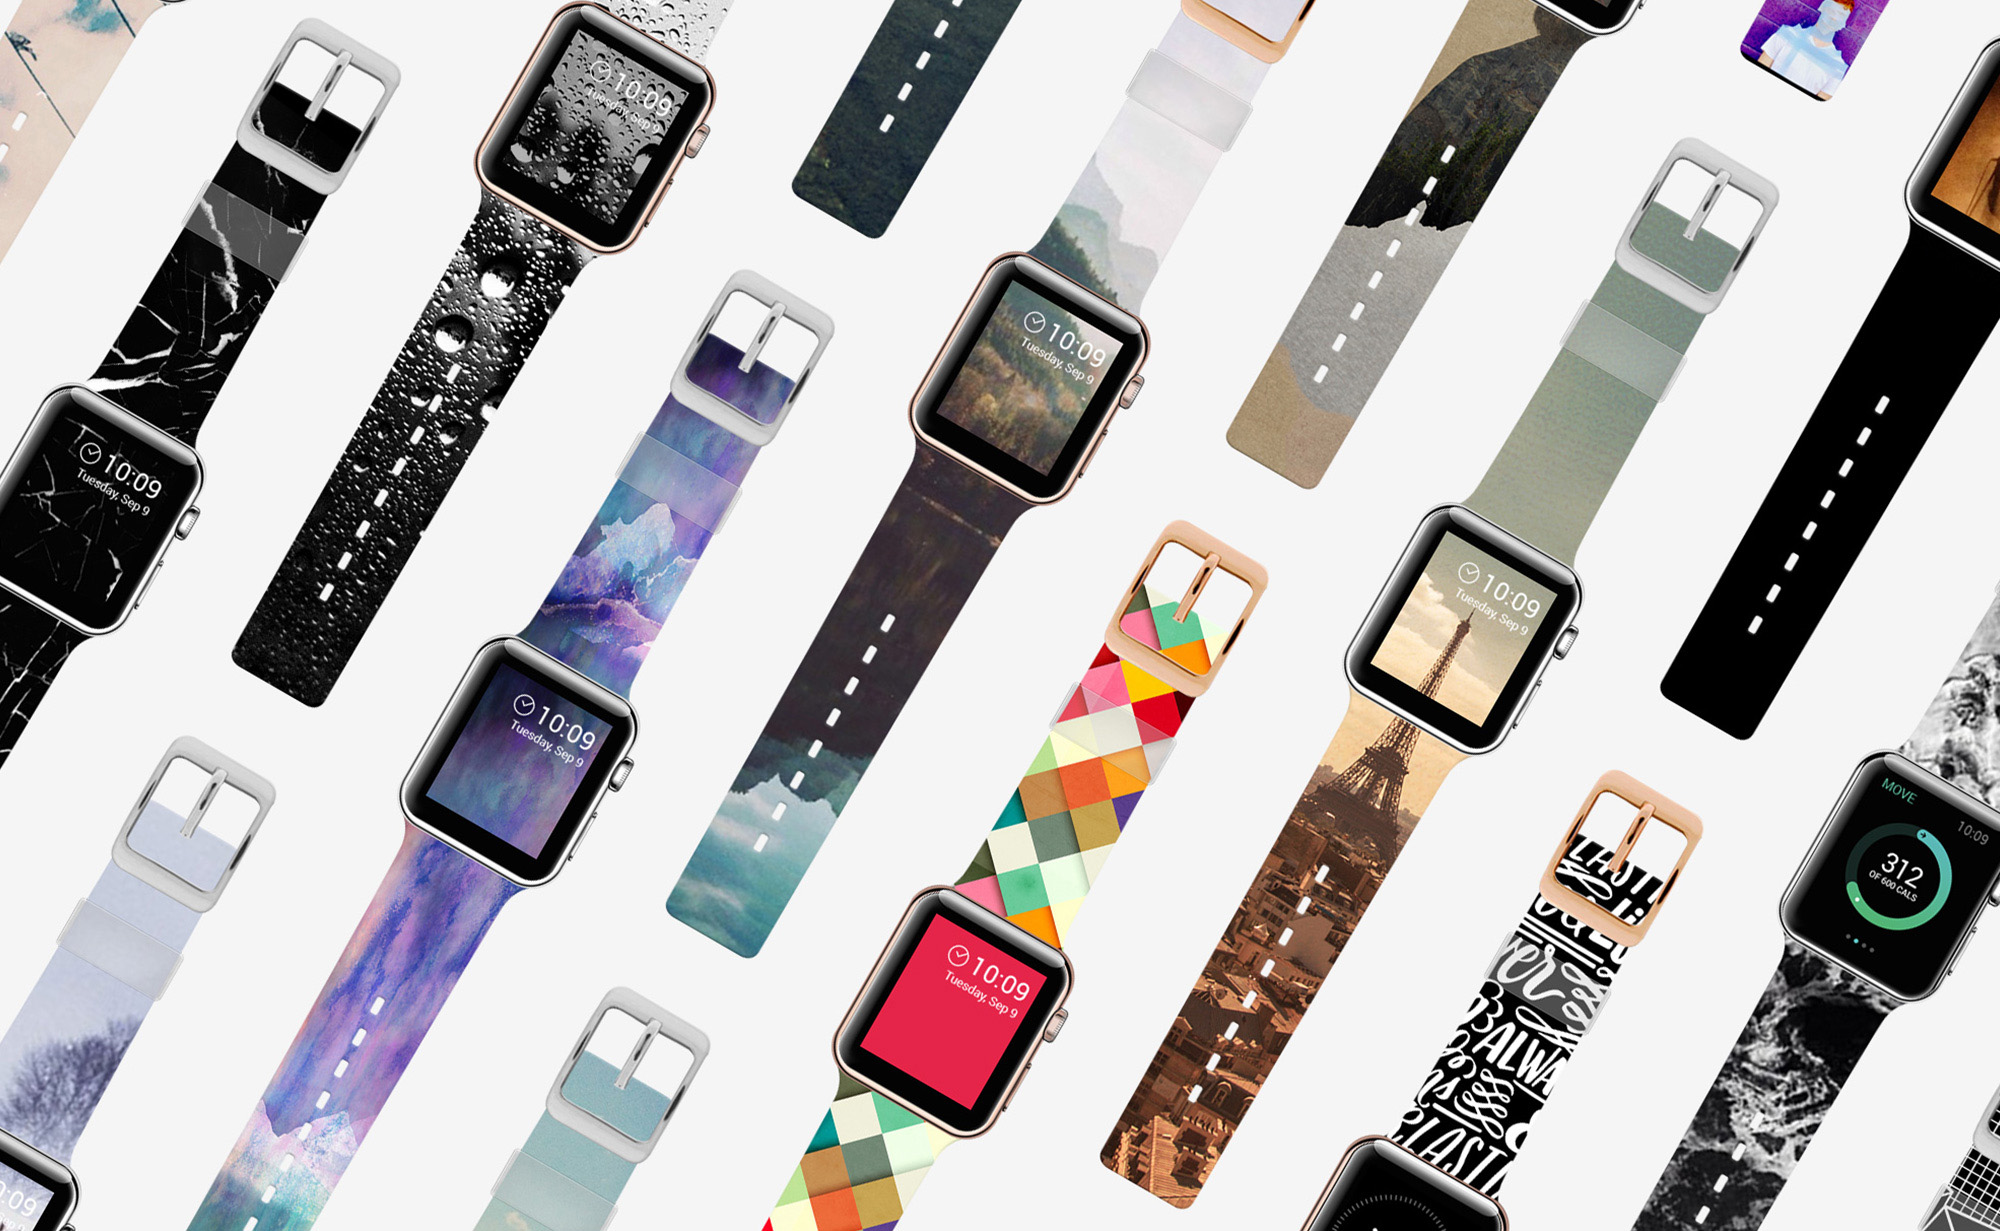 Customize the New Apple Watch With Favorite Instagrams